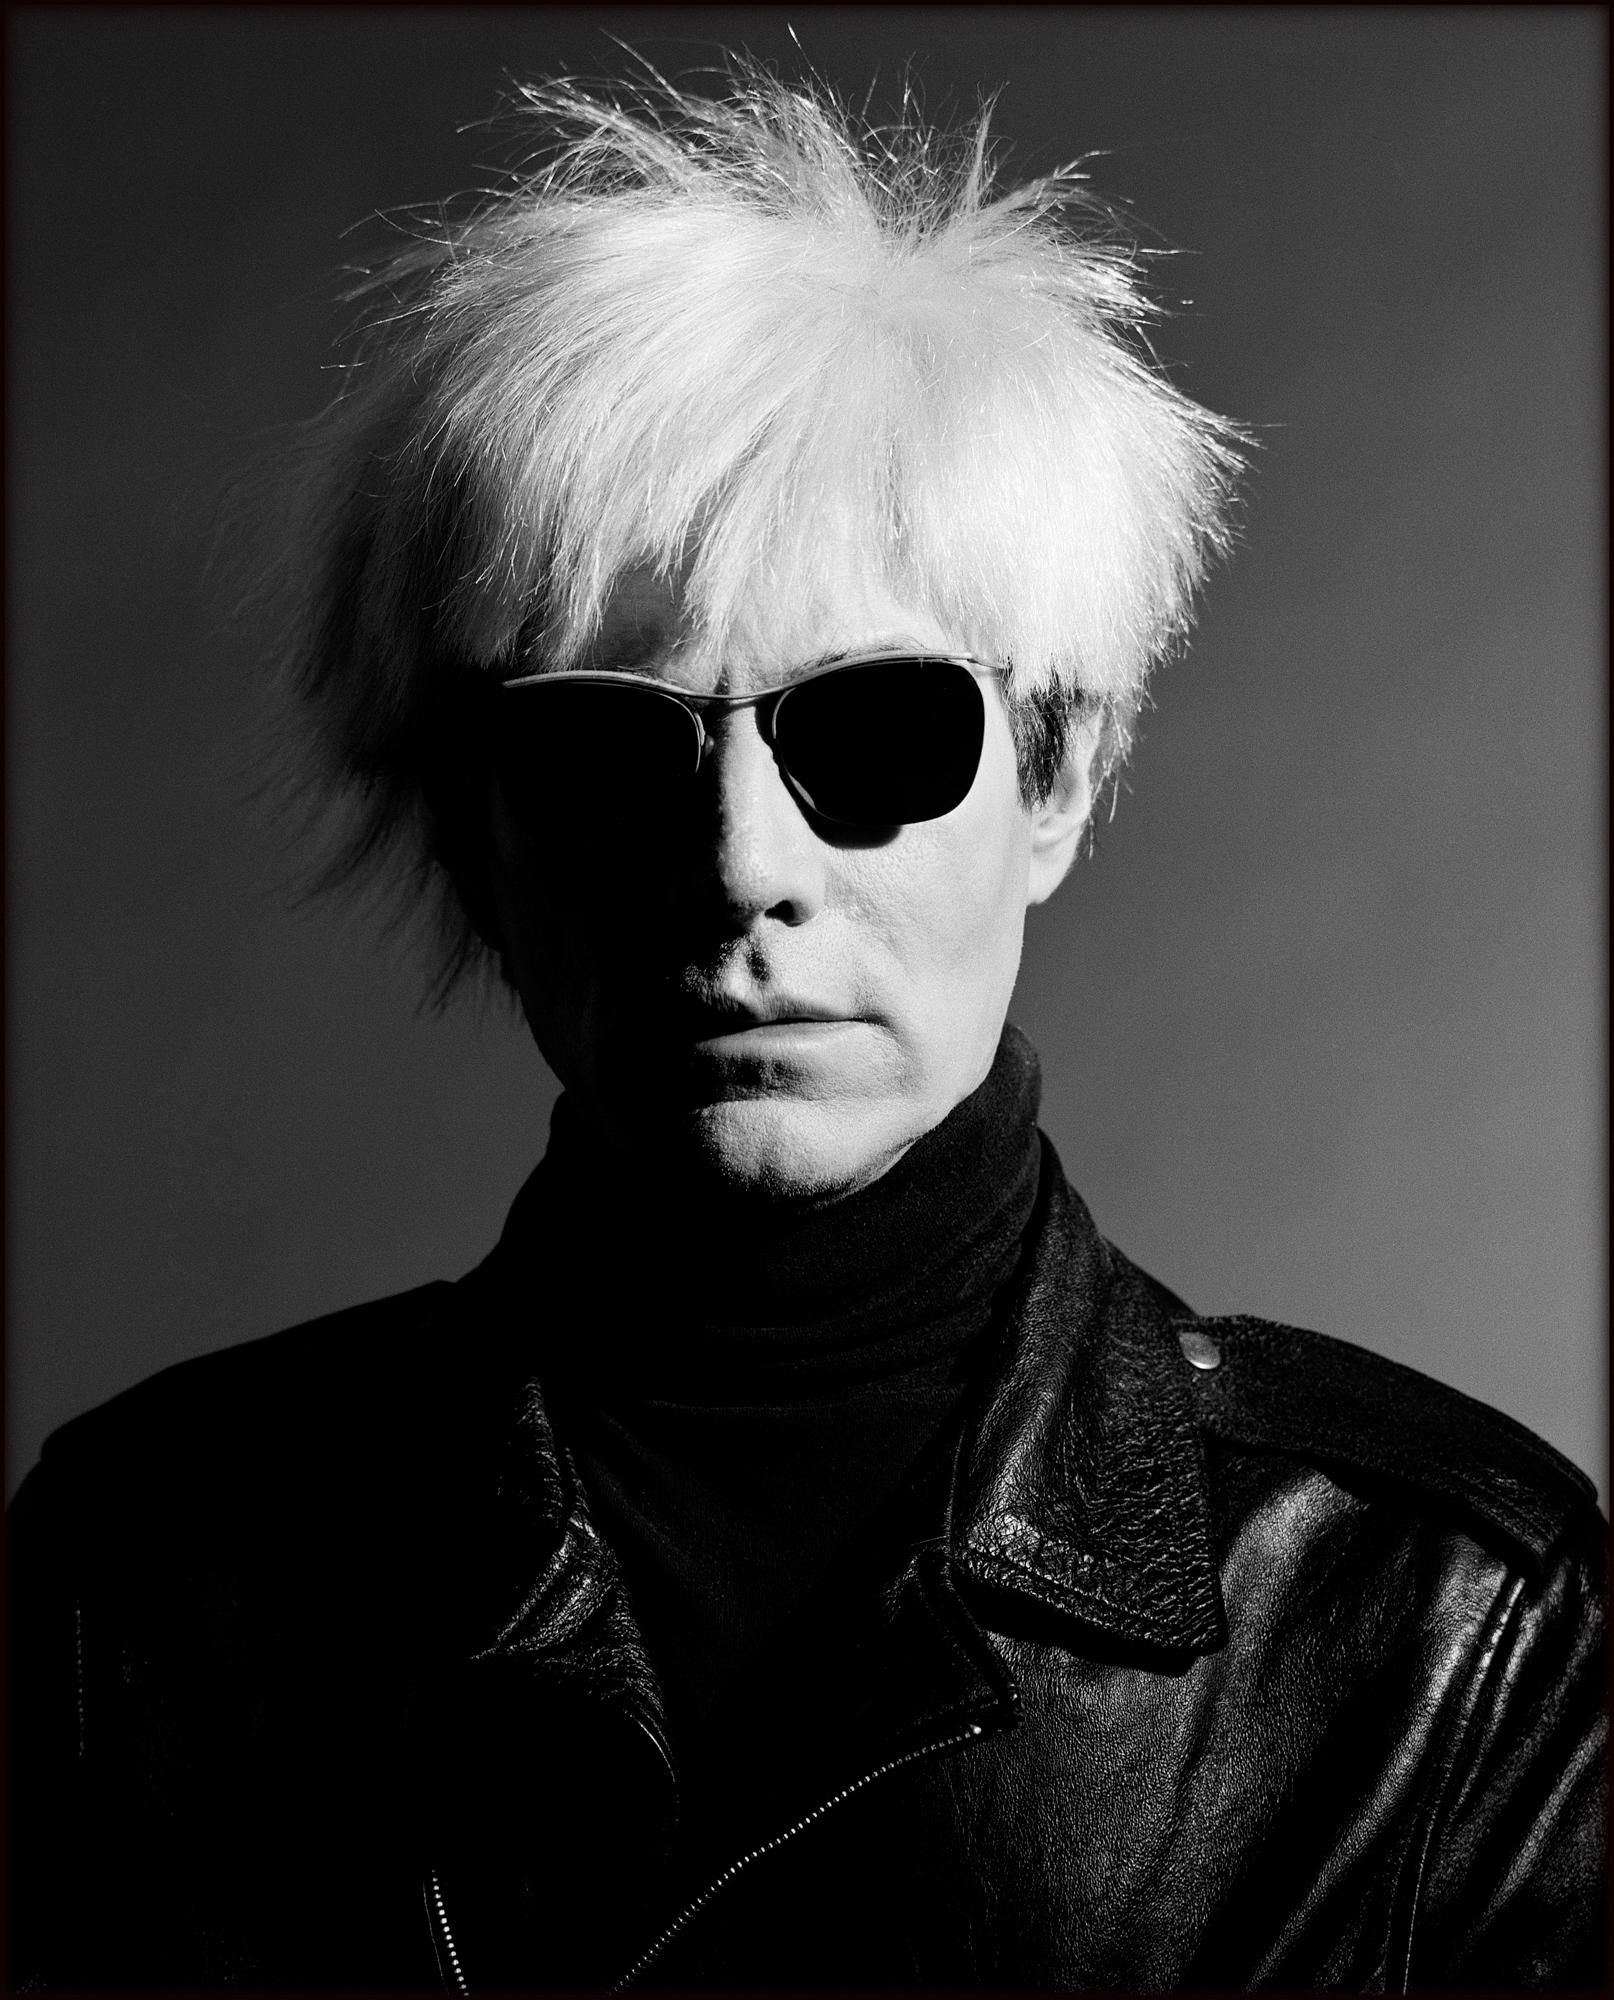 Greg Gorman Black and White Photograph - Andy Warhol, Los Angeles, 21st Century, Contemporary, Celebrity, Photography